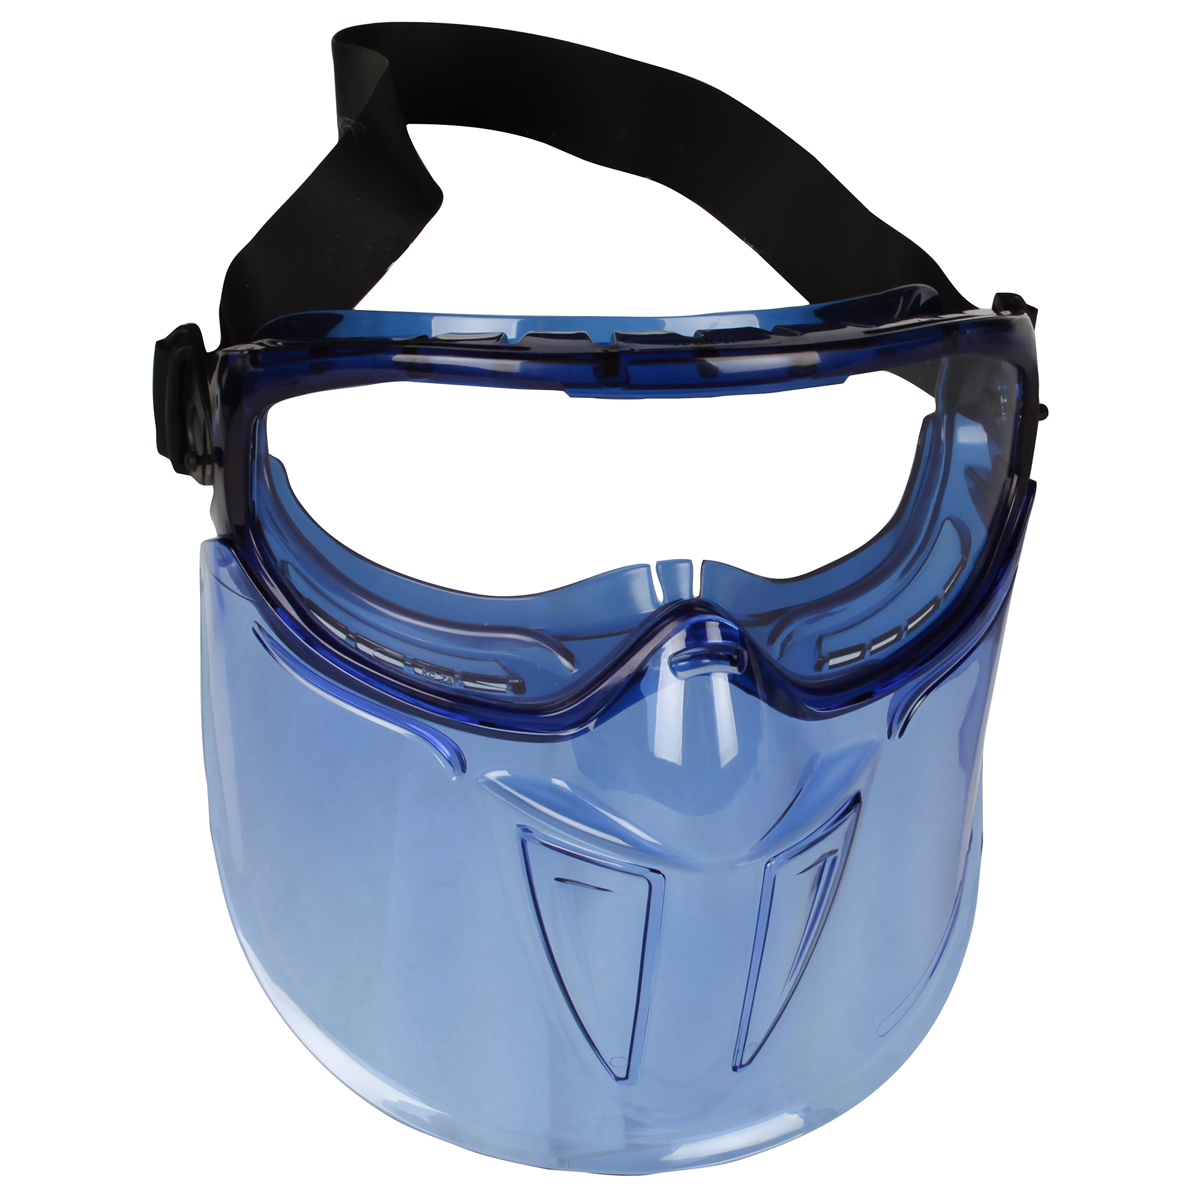 Airgas - K4518629 - Kimberly-Clark Professional KleenGuard™ Shield  Monogoggle™ XTR Splash Goggles With Blue Frame And Clear Anti-Fog Lens